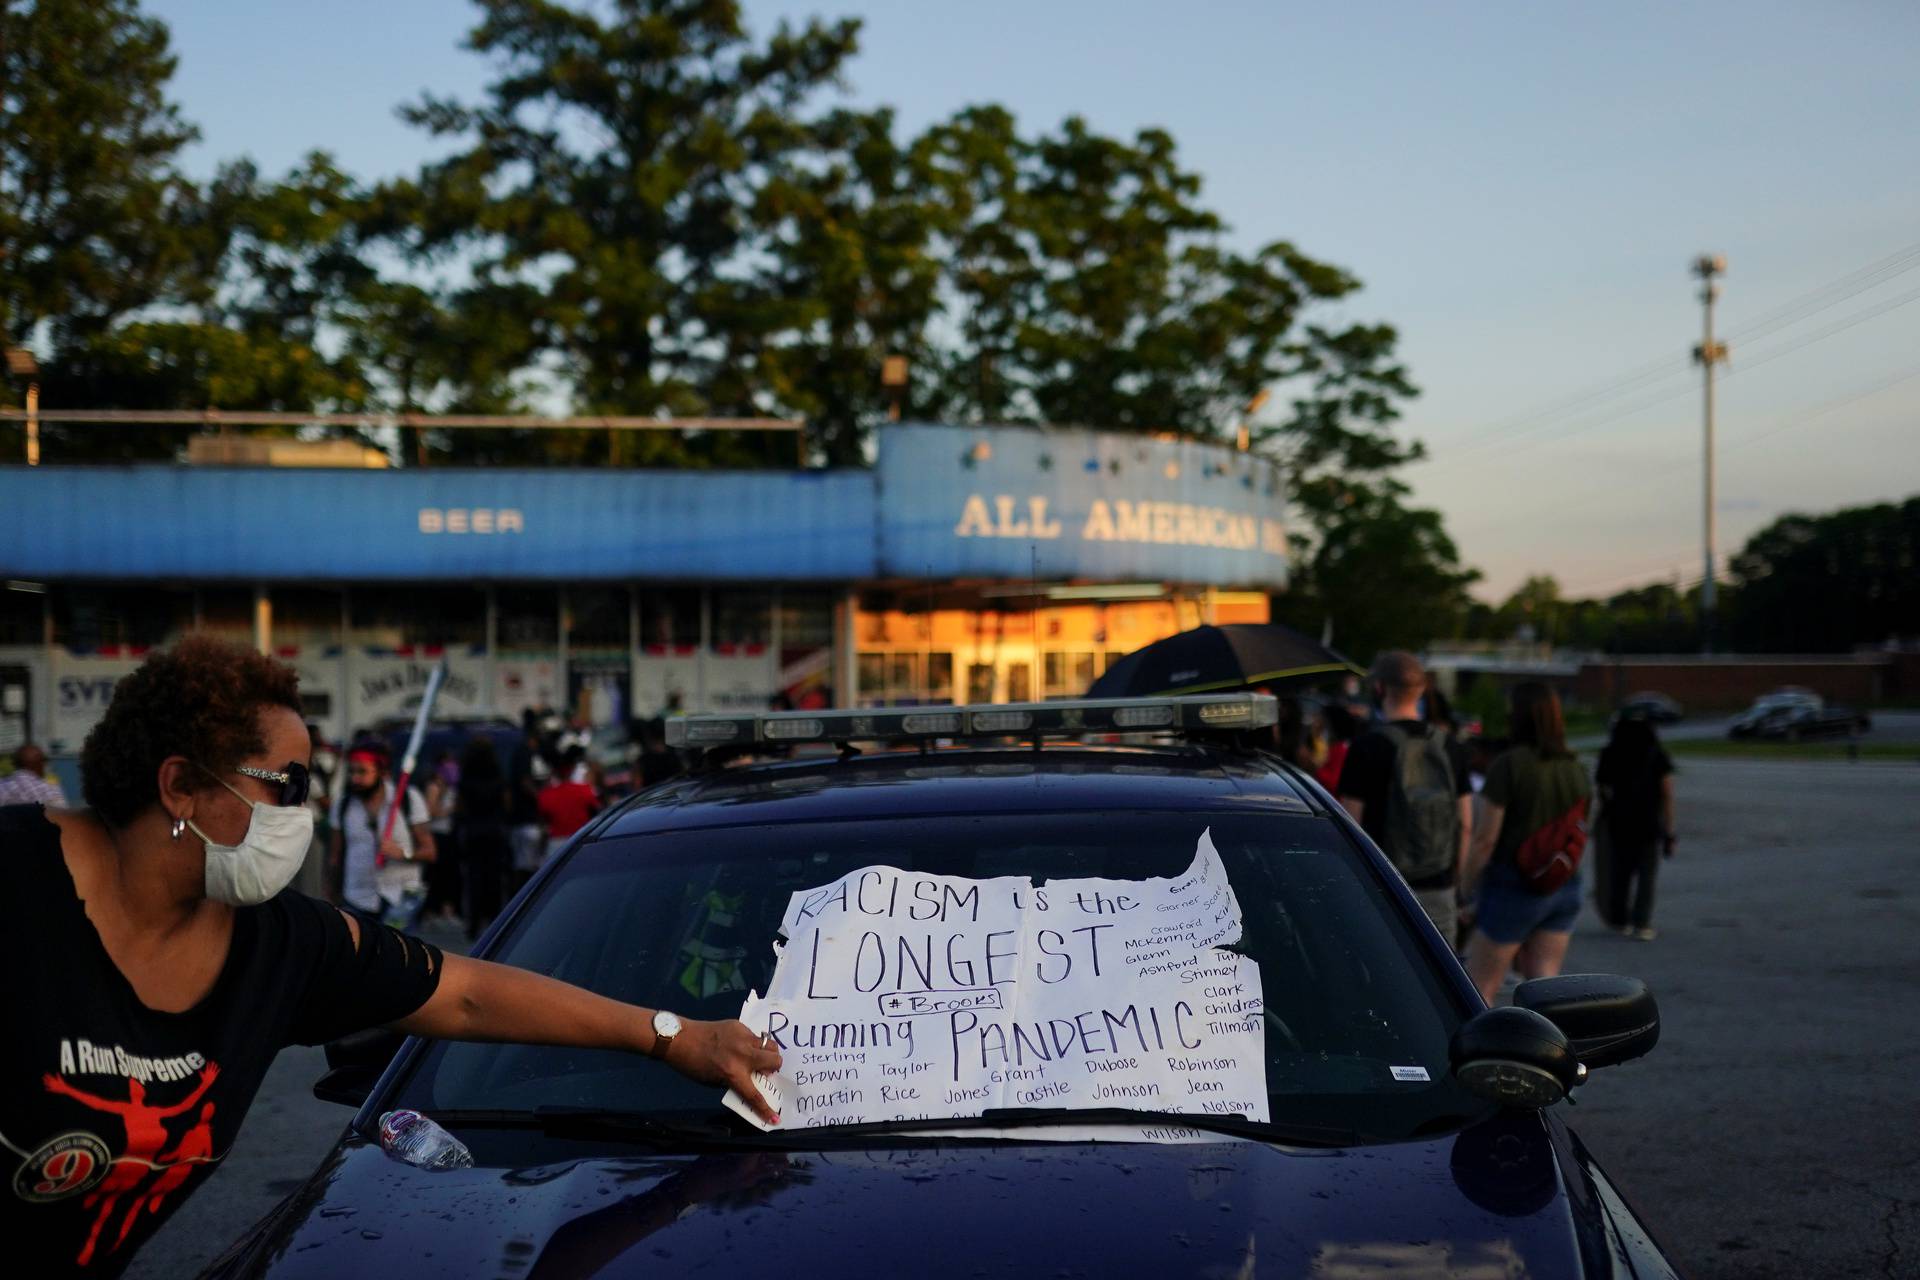 A woman adjusts a protest sign that was placed under the windshield wiper of a police car during a rally against racial inequality and the police shooting death of Rayshard Brooks, in Atlanta